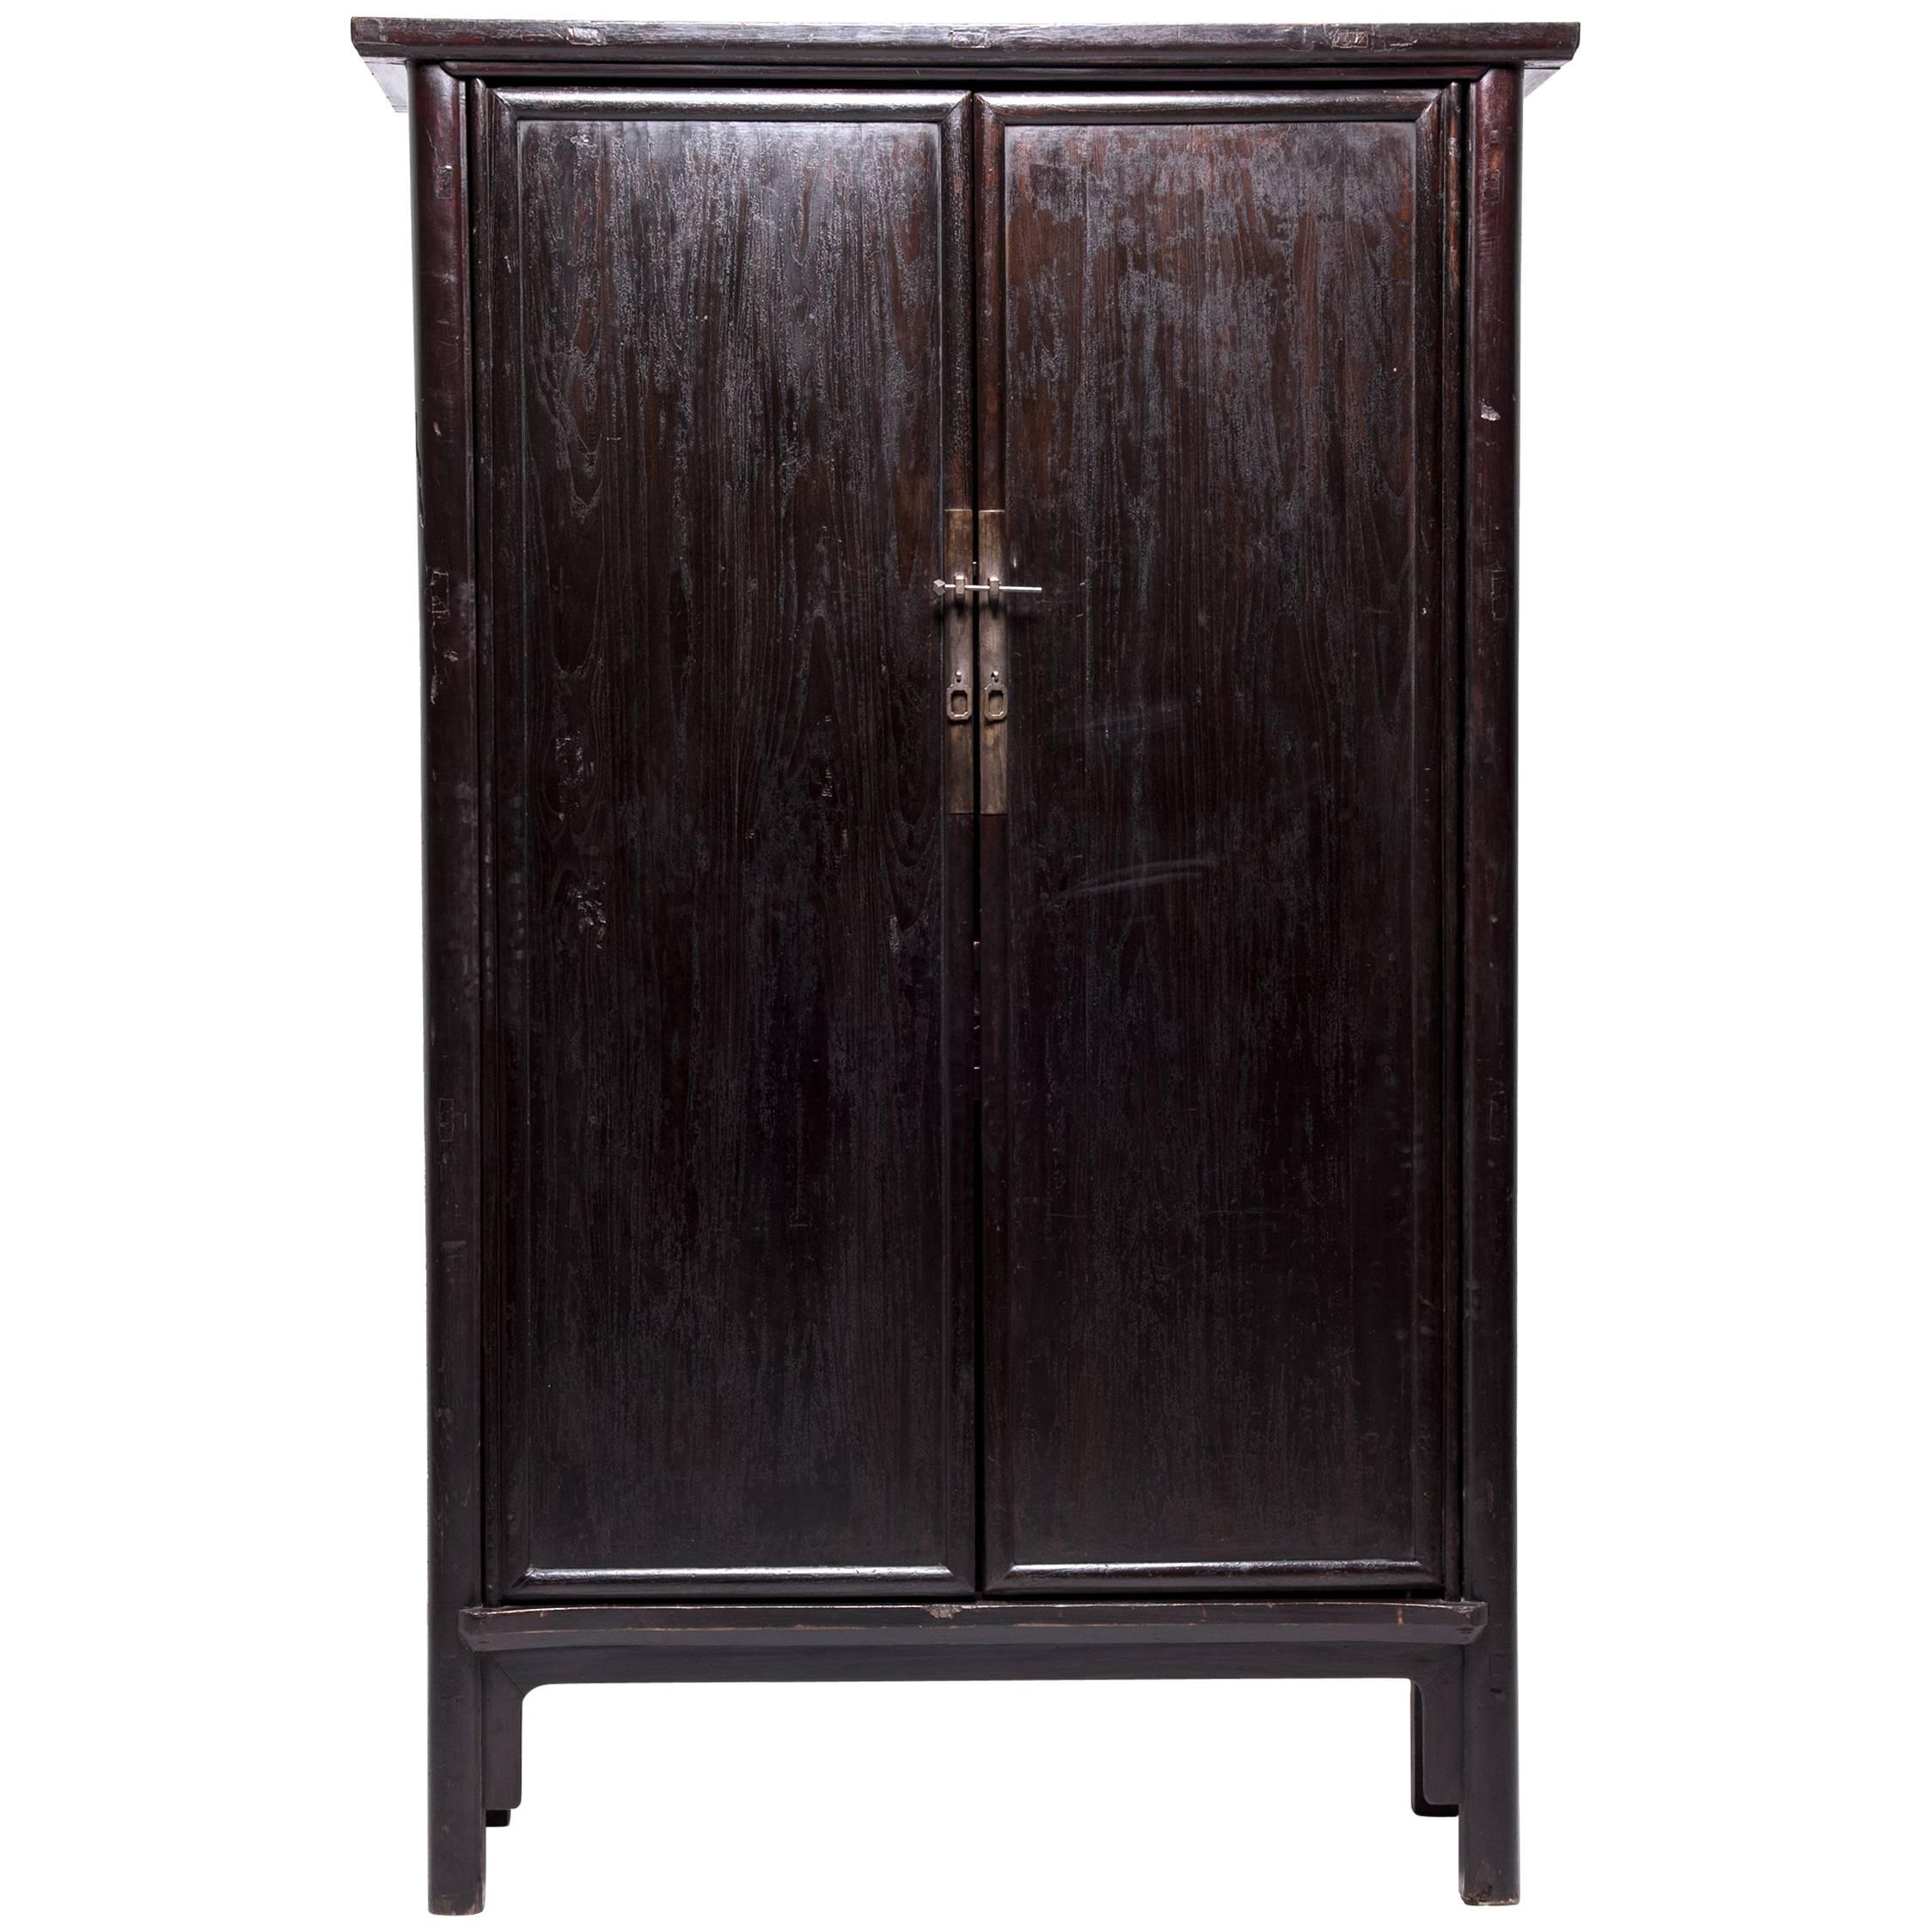 19th Century Chinese Two-Door Noodle Cabinet